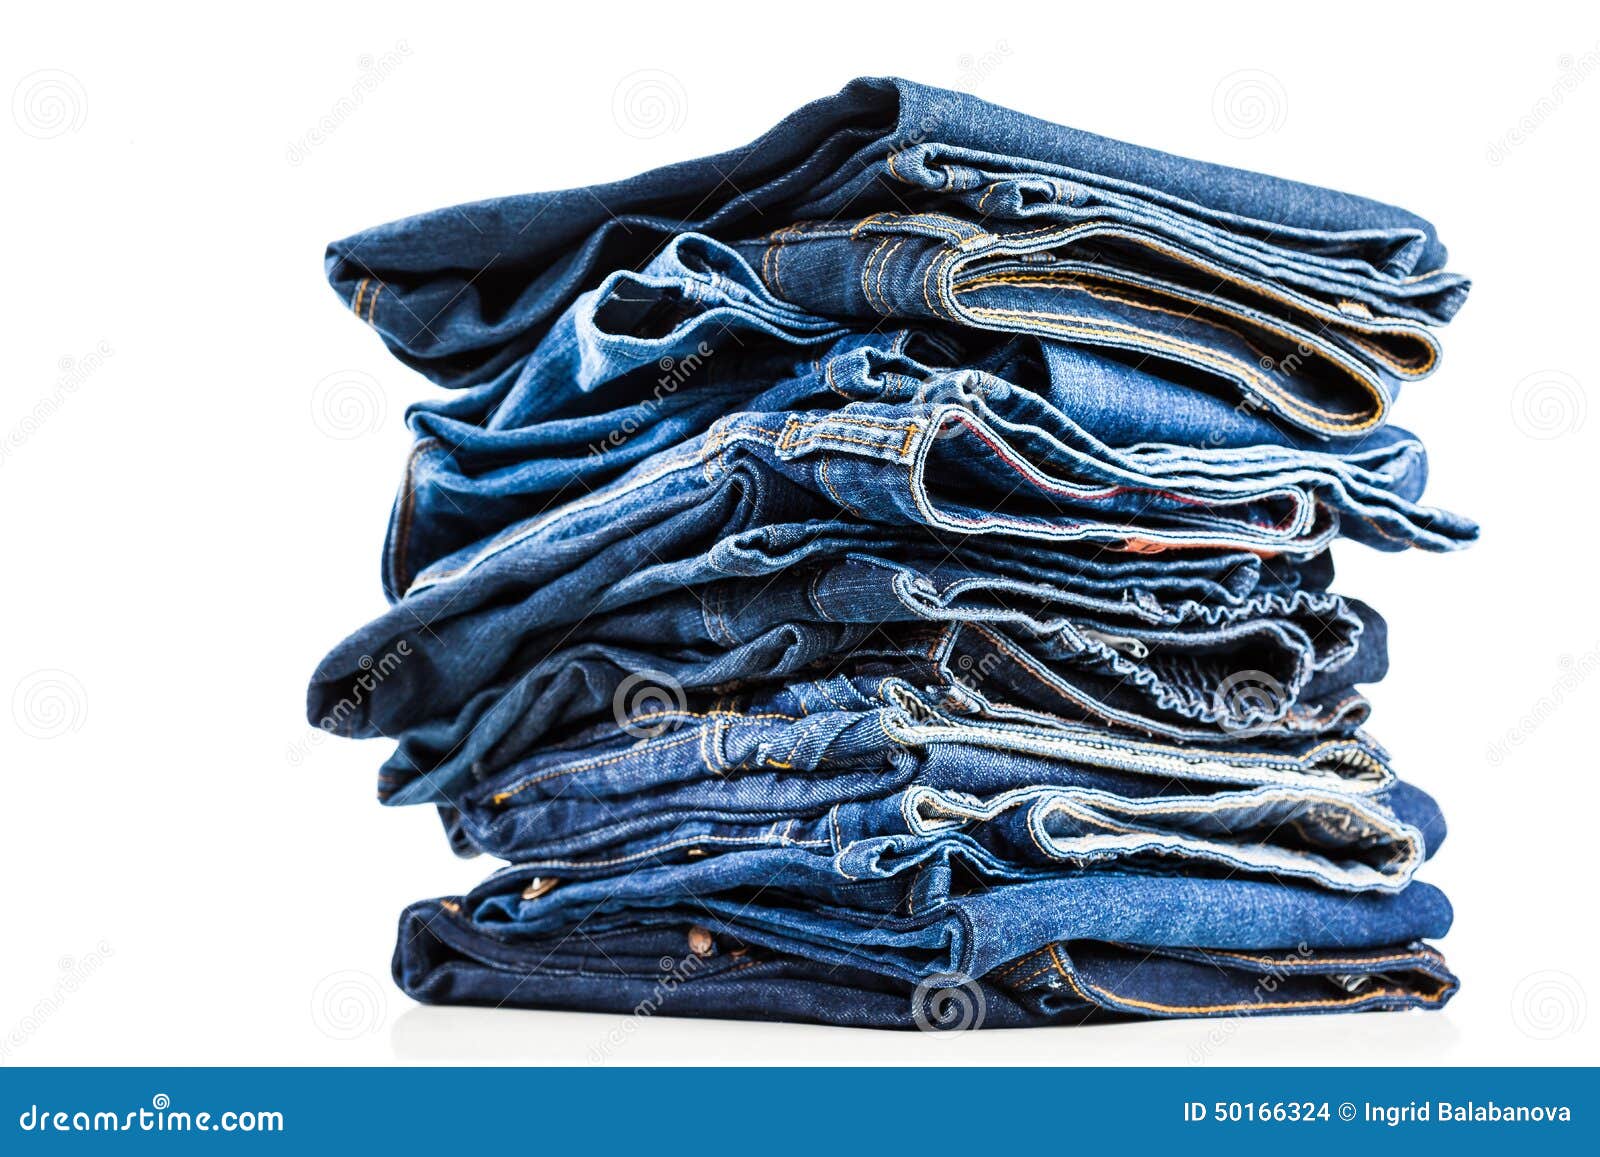 Blue jeans stock photo. Image of objects, material, macro - 50166324